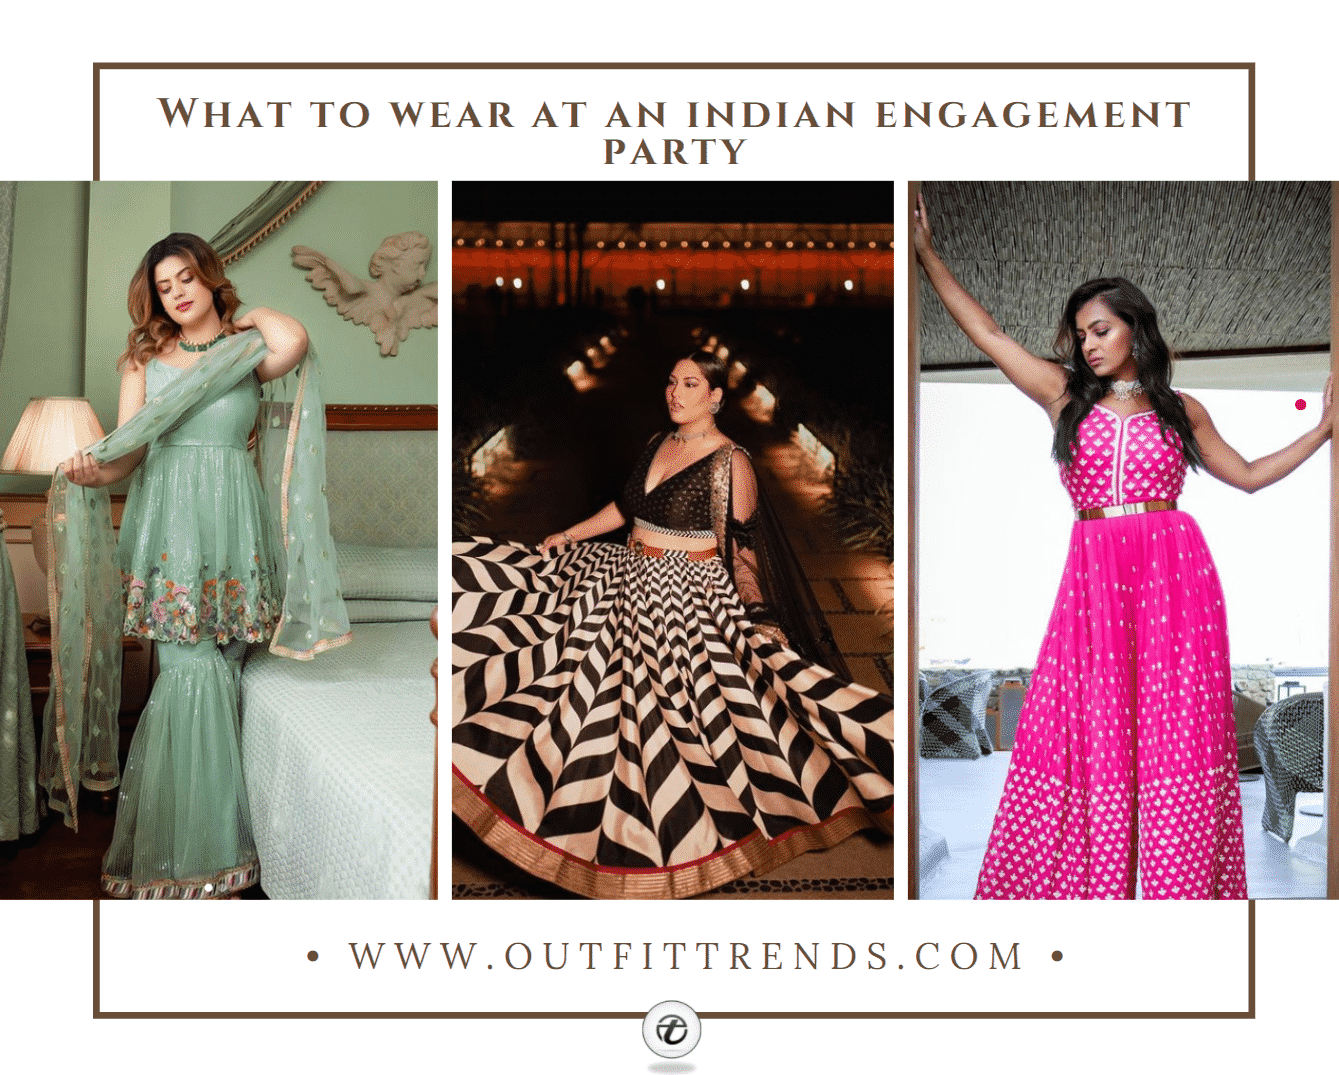 Top 3 Engagement Party Dresses - Fashionably Yours Bridal & Formal Wear